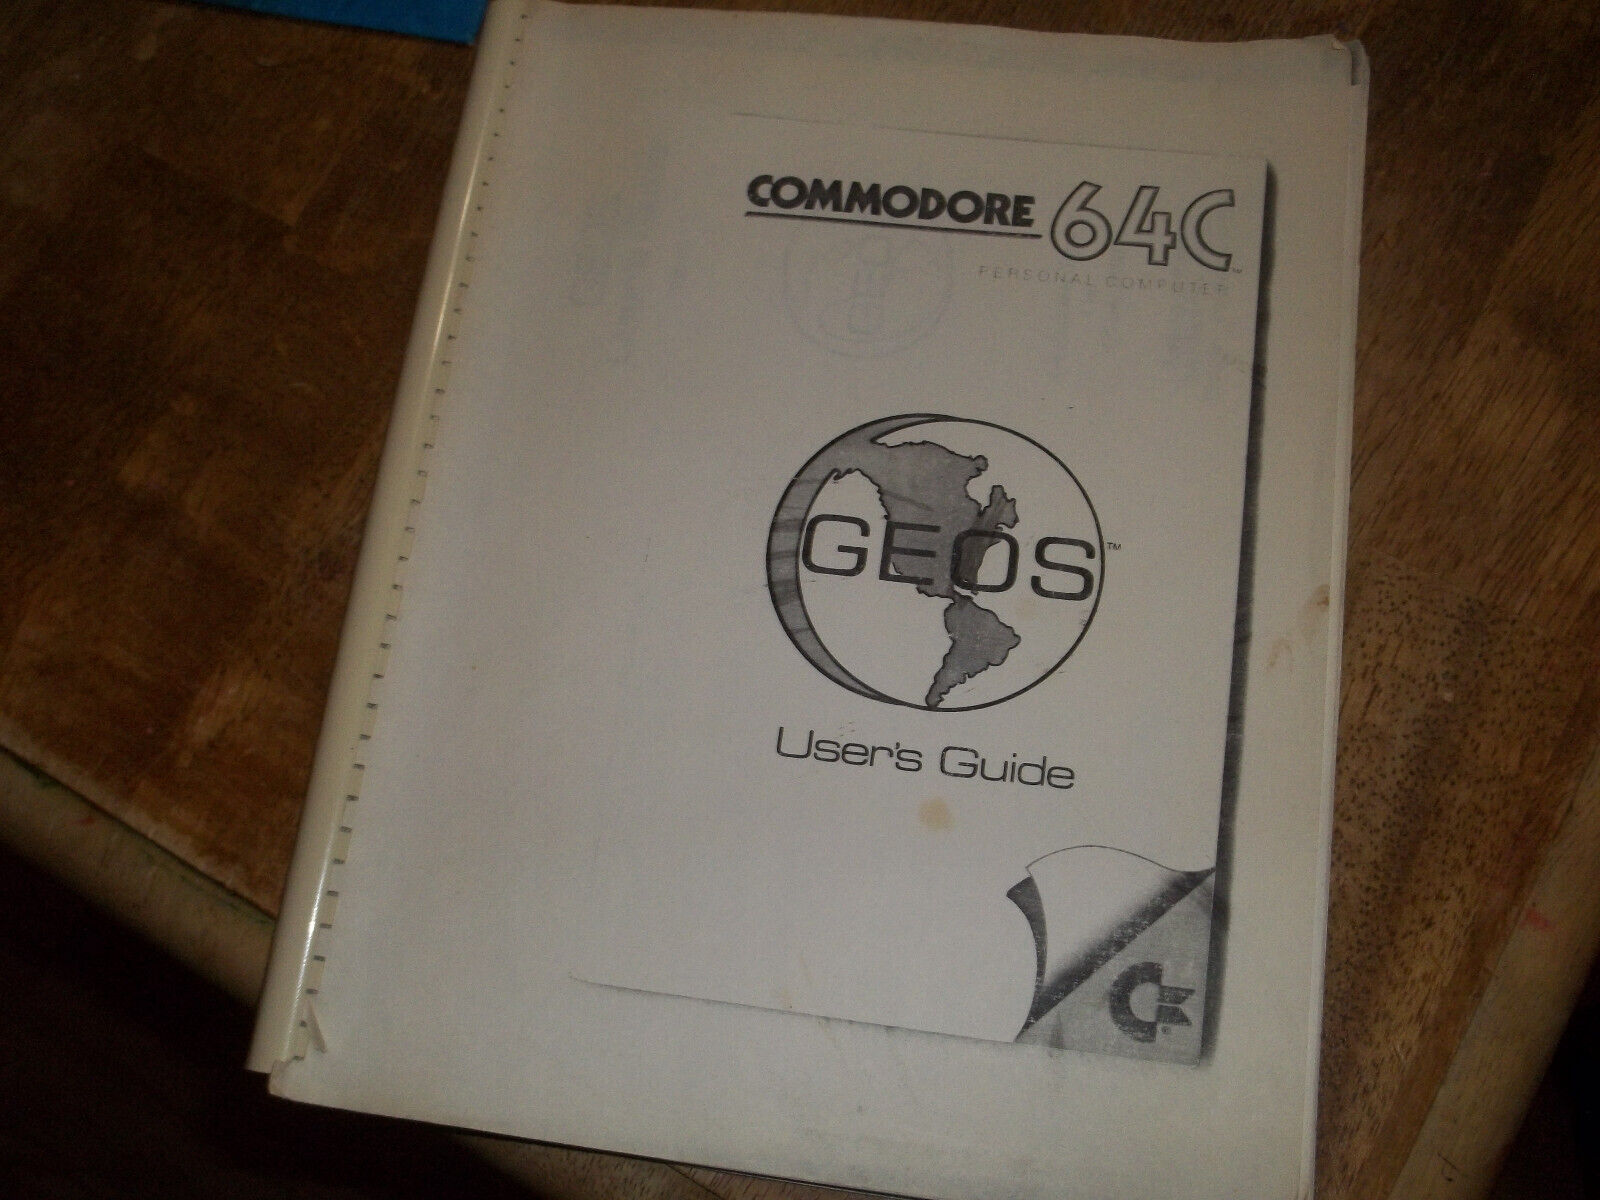 COMMODORE 64C Personal computer System Guide Learning to program in Basic 2.0 